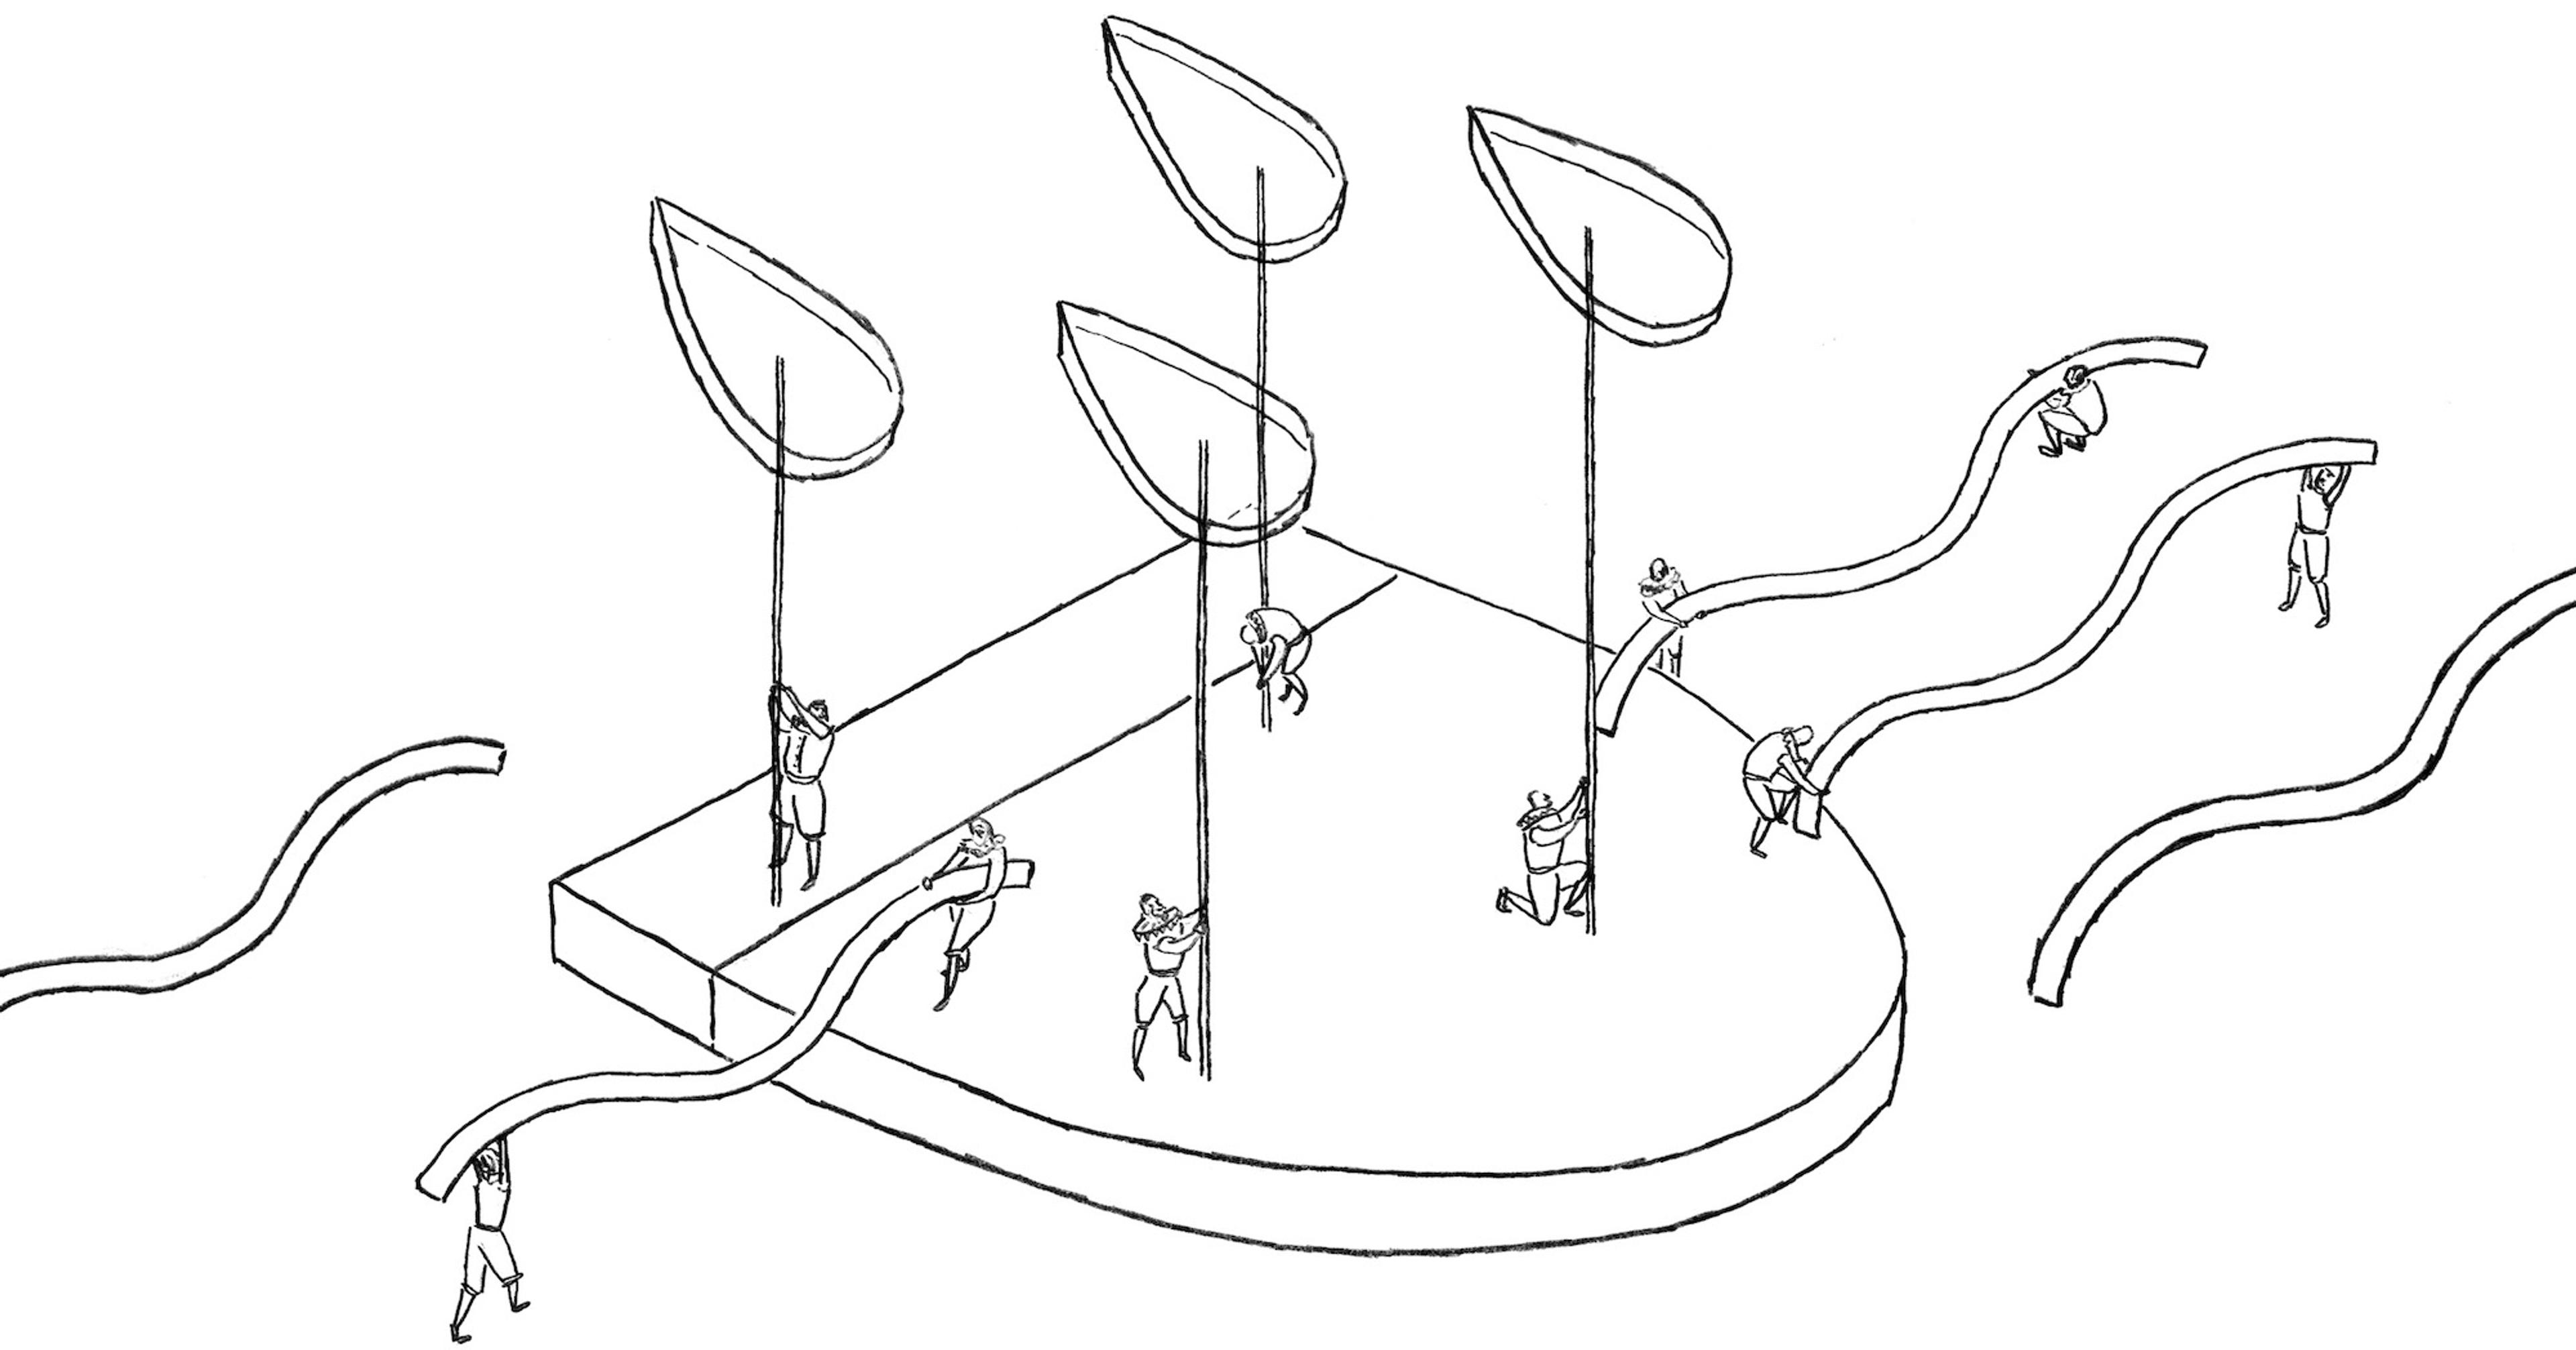 Line drawing showing a large shield-shaped platform with people arranging large decorative elements on top of it, including pear-shaped drops of water